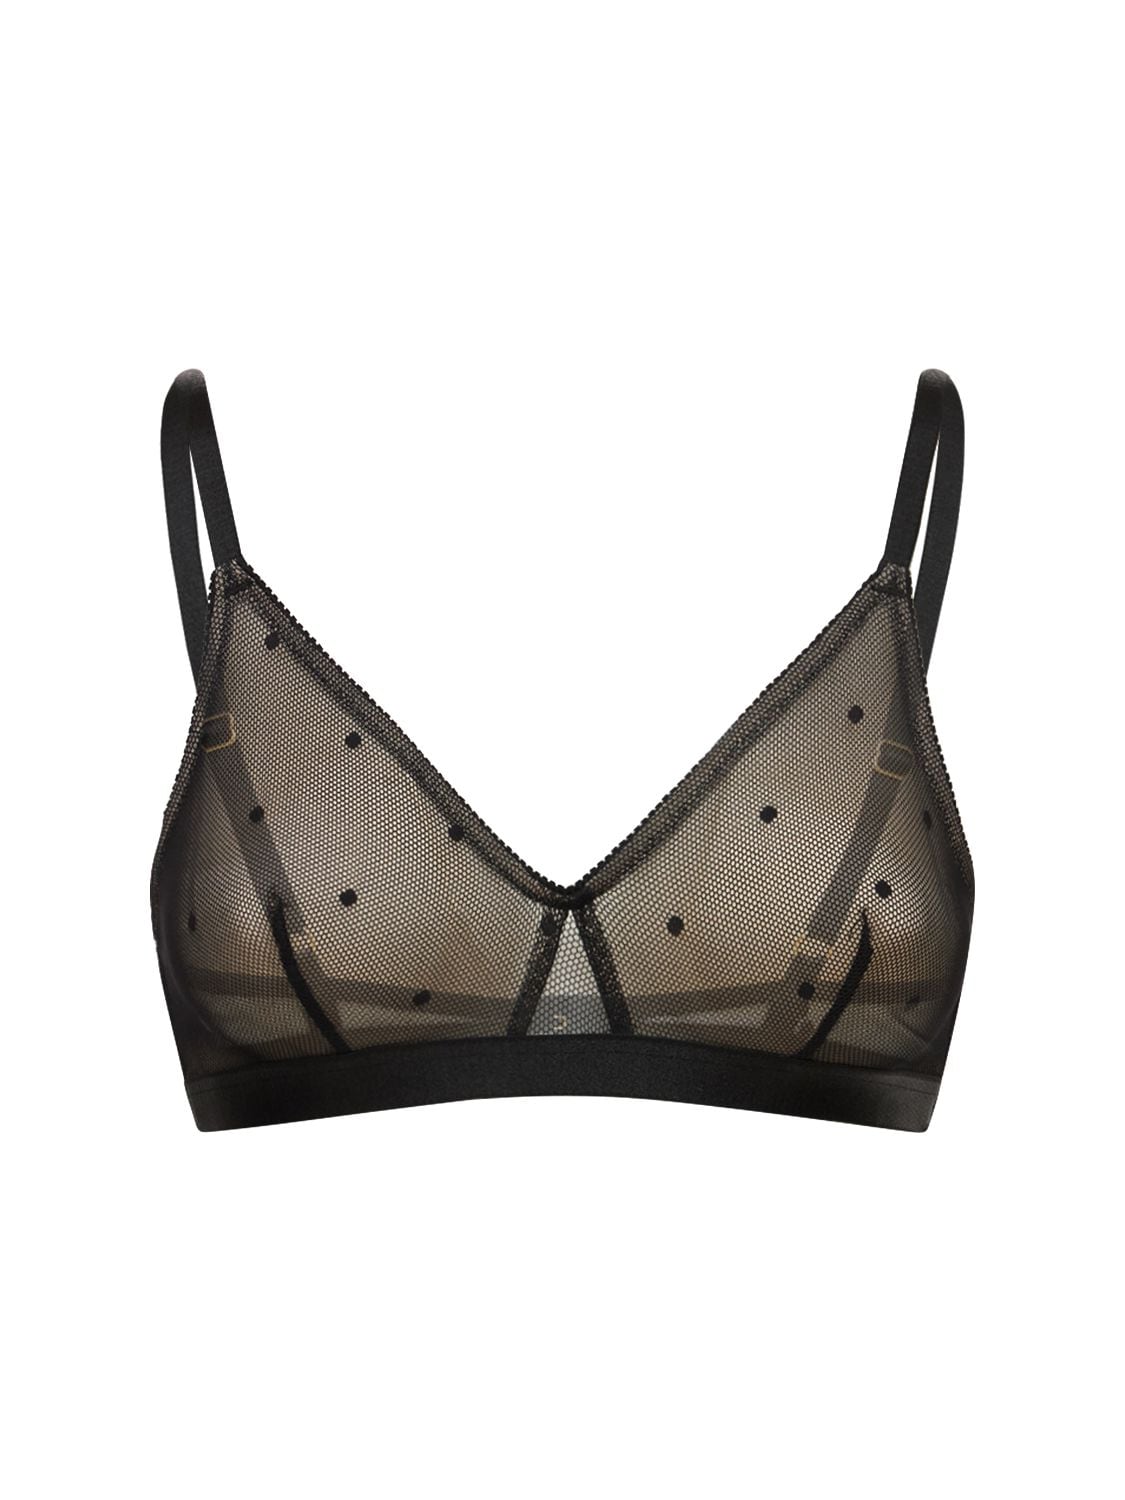 Shop Now For The Alexandra Lace Triangle Bra | Earth Shop